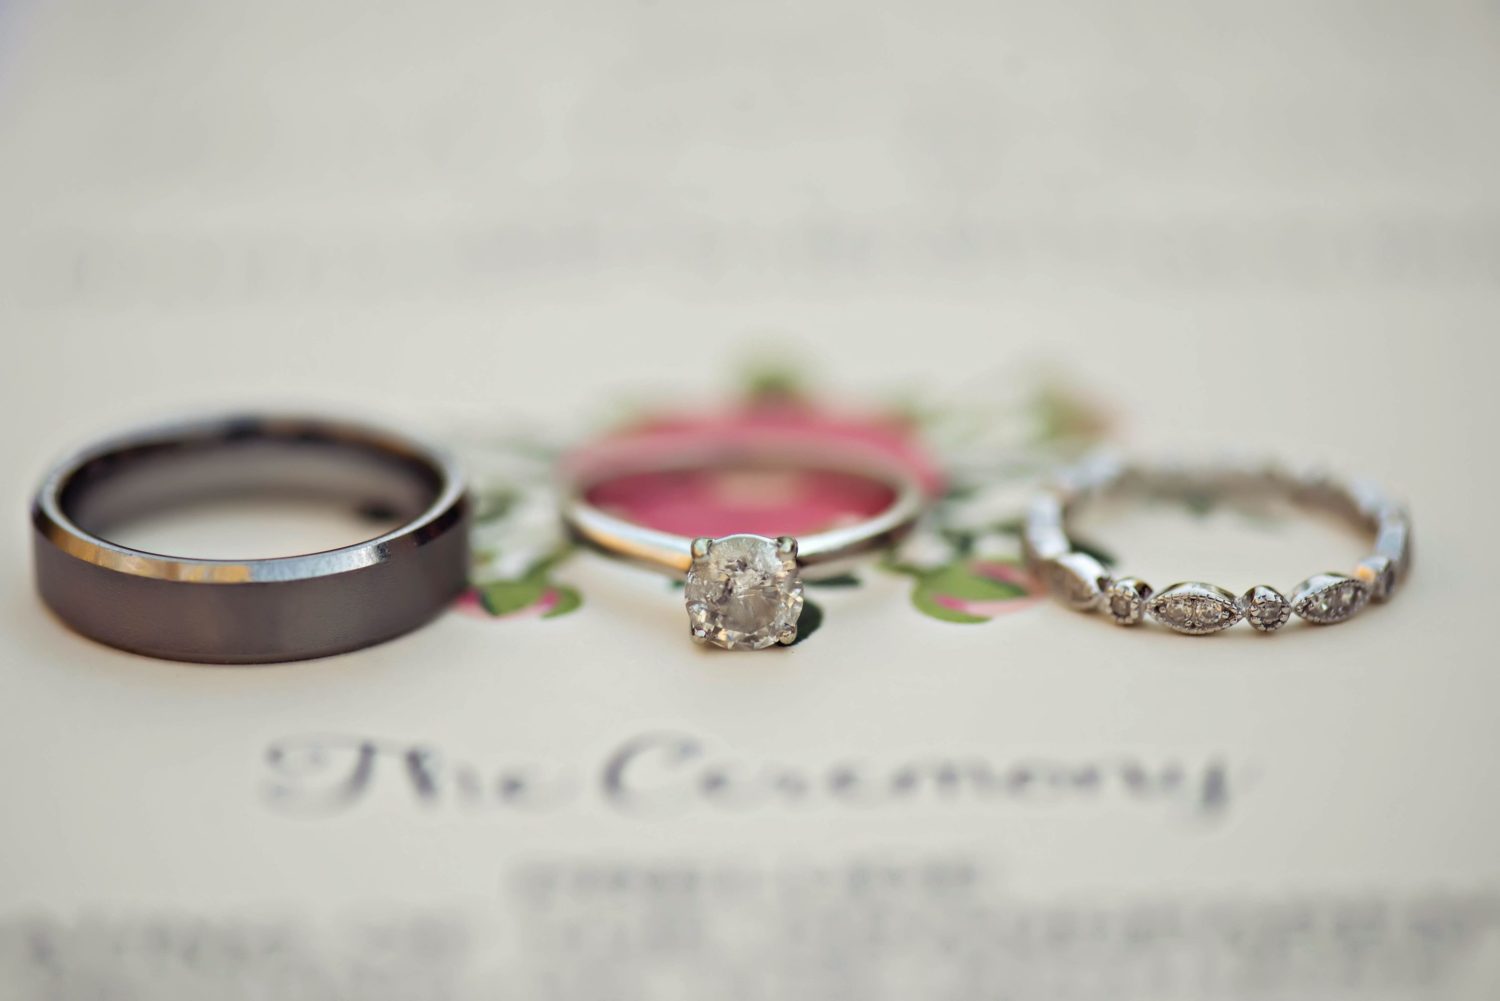 Wedding bands and Engagement ring